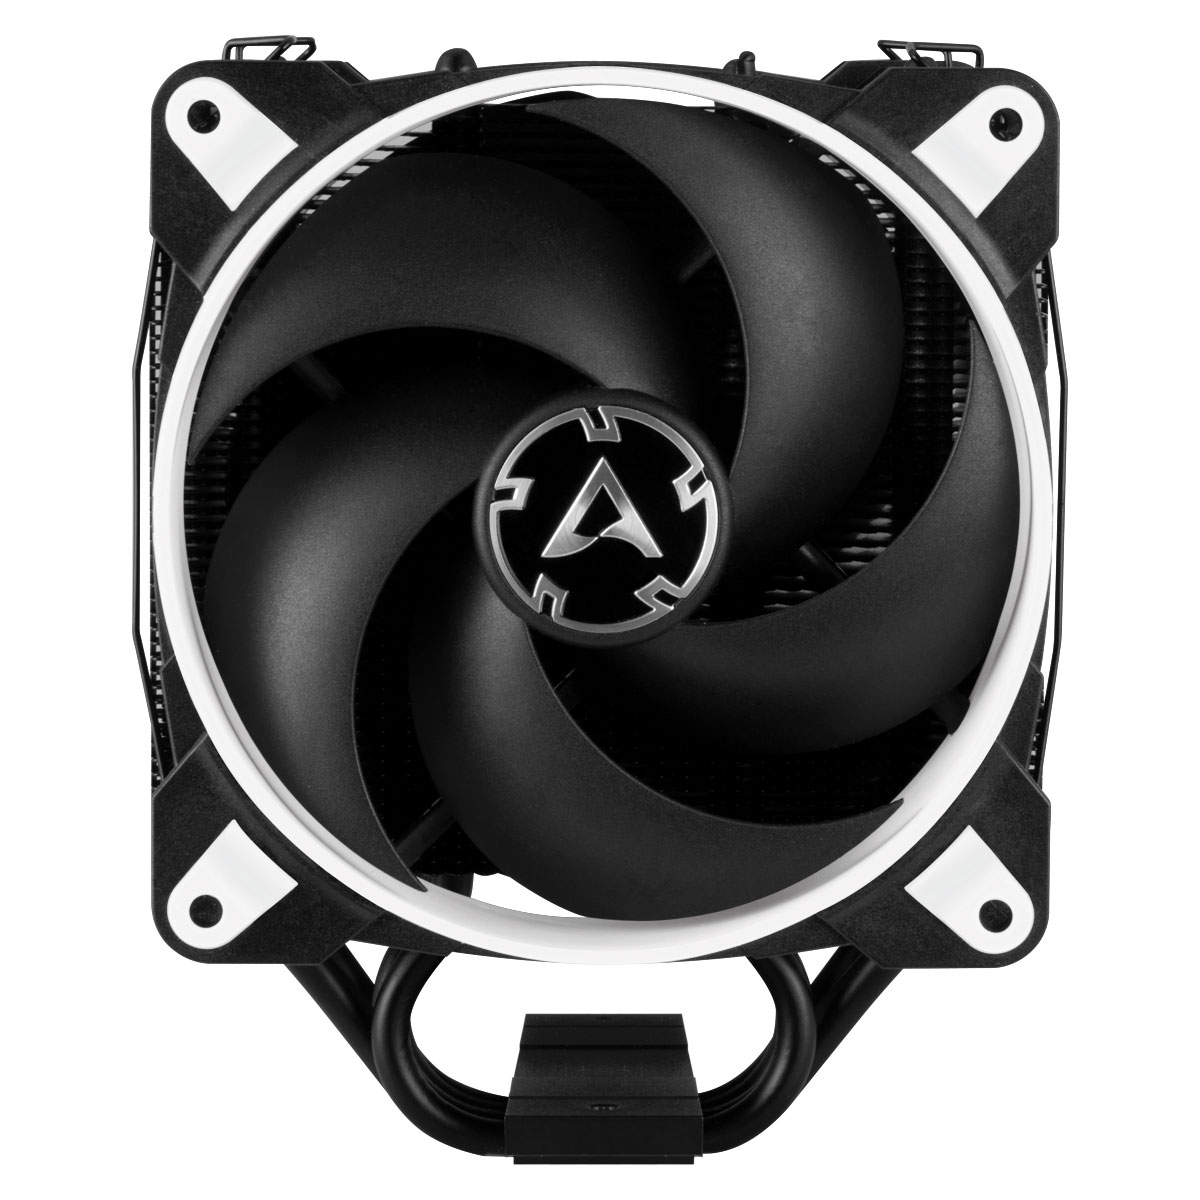 Wide Range of Regulation 200 to 2100 RPM ARCTIC Freezer 34 eSports Includes Low Noise PWM 120 mm Fan Tower CPU Cooler with Push-Pull Configuration Red 